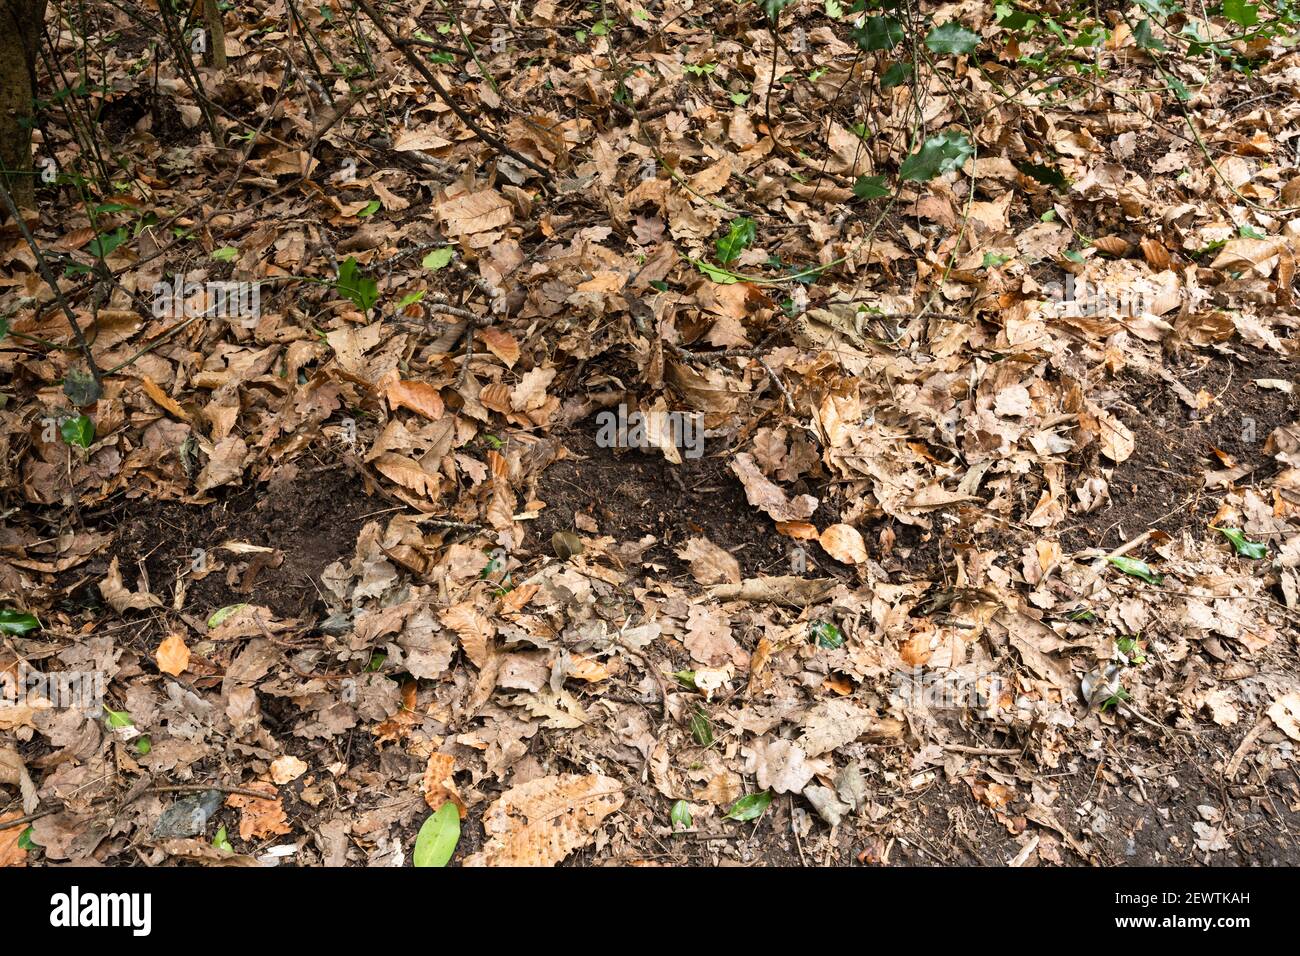 Disturbed ground near a badger sett caused by the animals snuffling or rooting around in the soil under leaves for worms, UK woodland animal signs Stock Photo